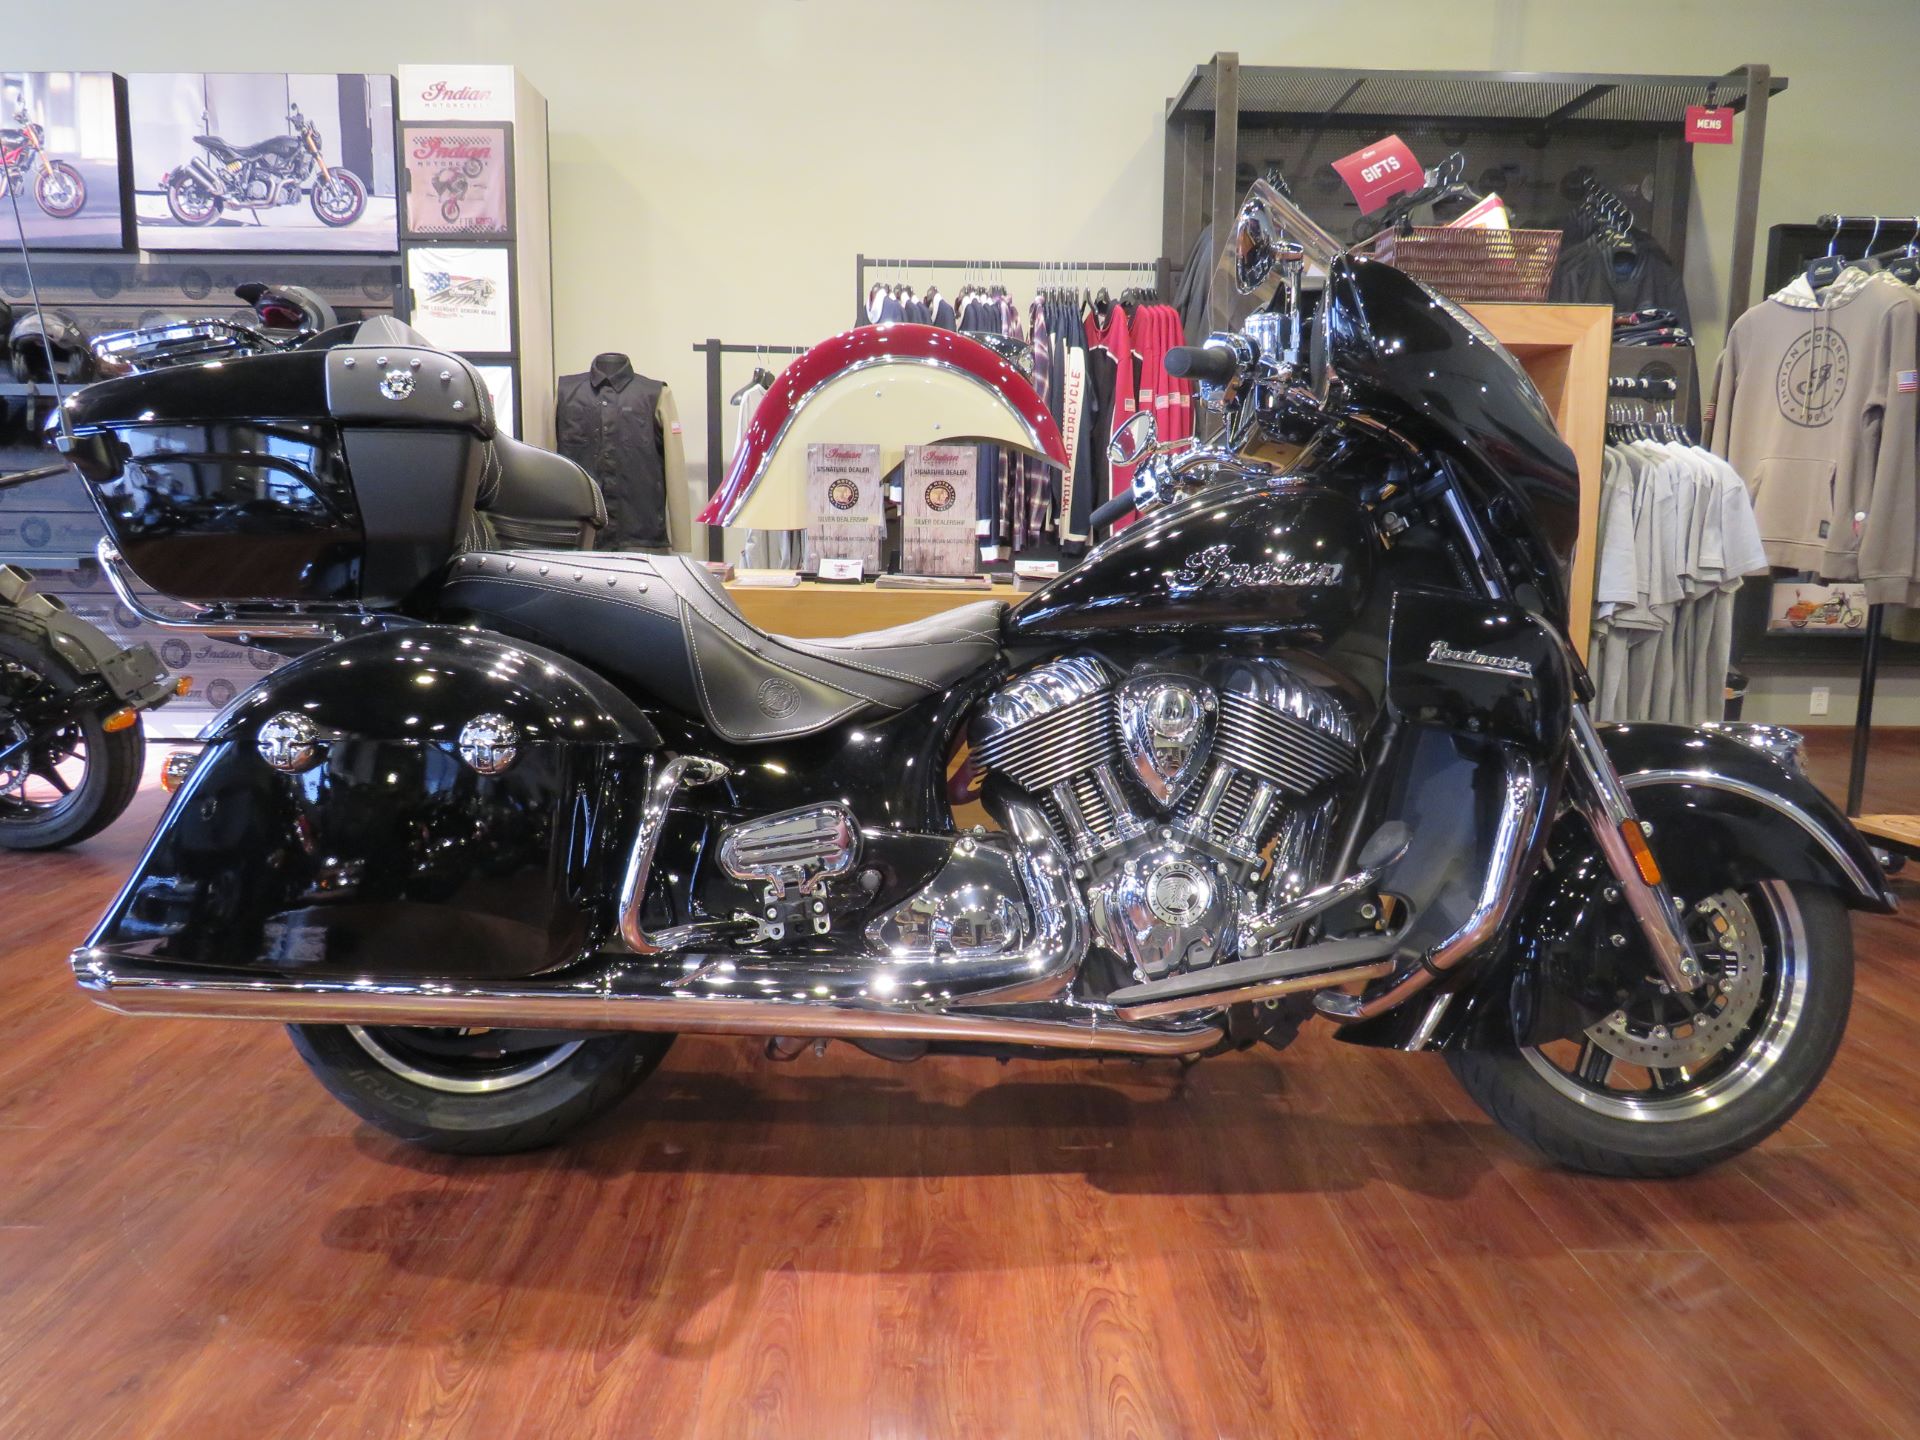 2022 Indian Roadmaster® in Fort Worth, Texas - Photo 1